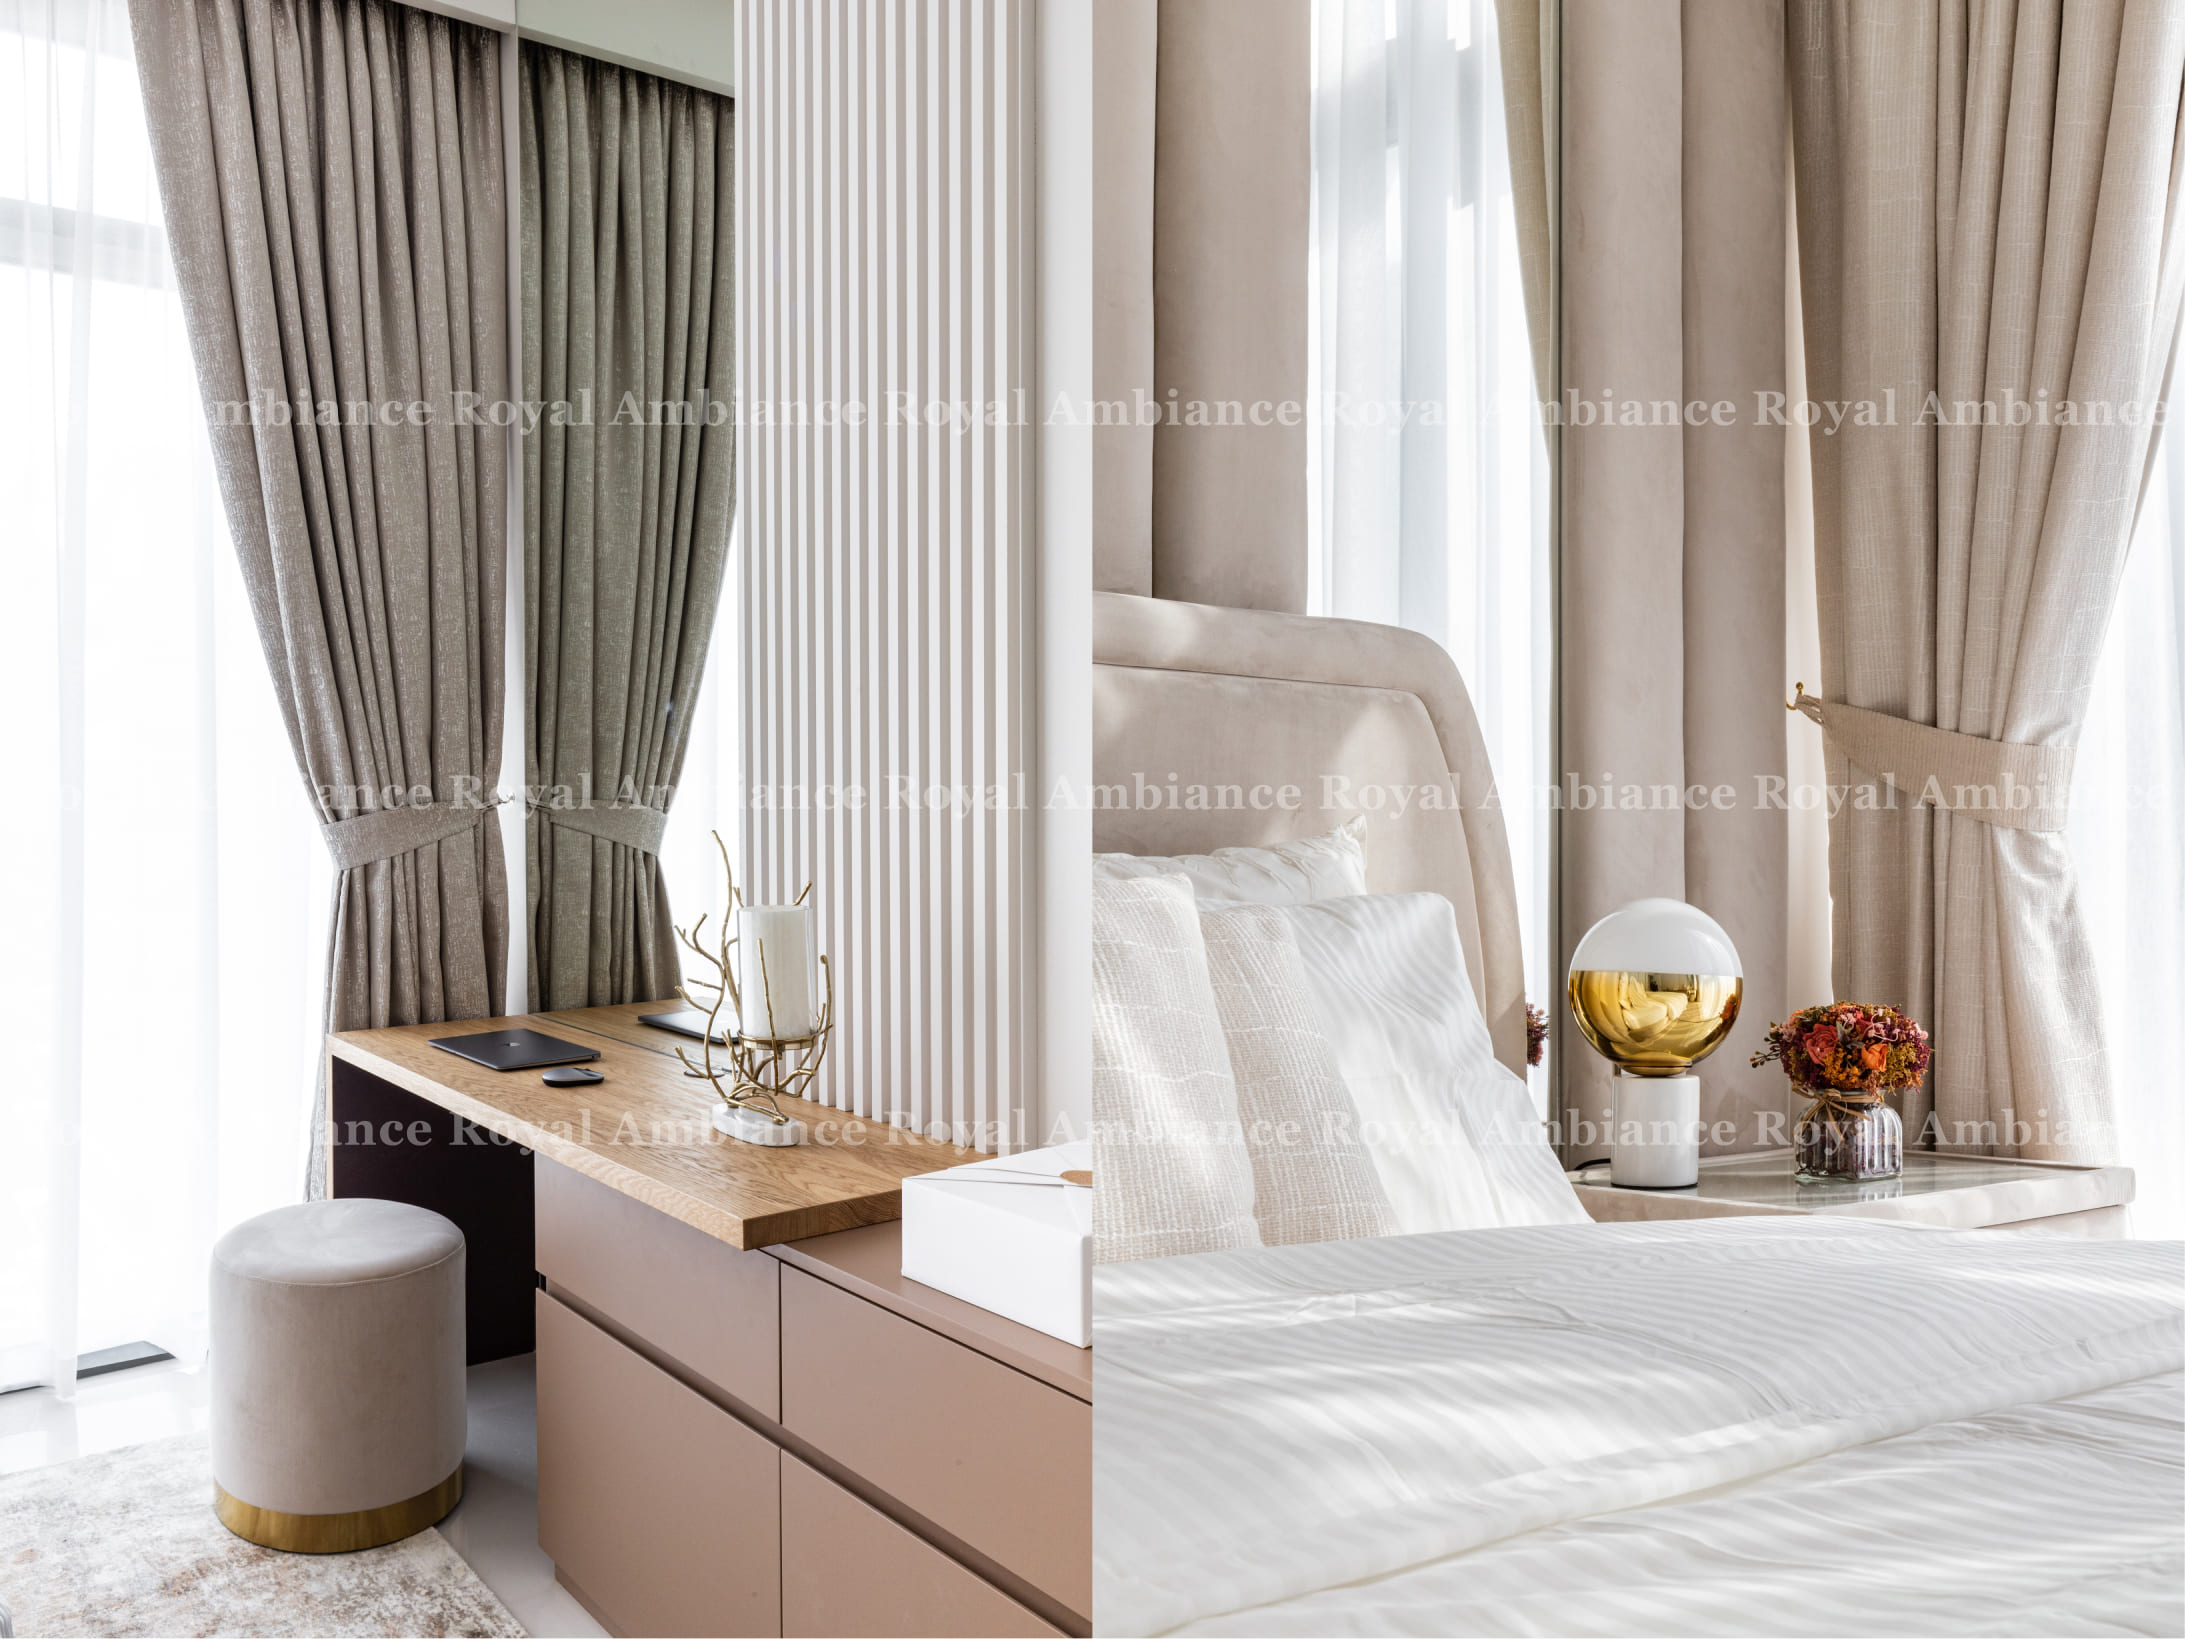 Beach Vista by Emaar Apartment Bedroom Renovation Fit-Out Design 3